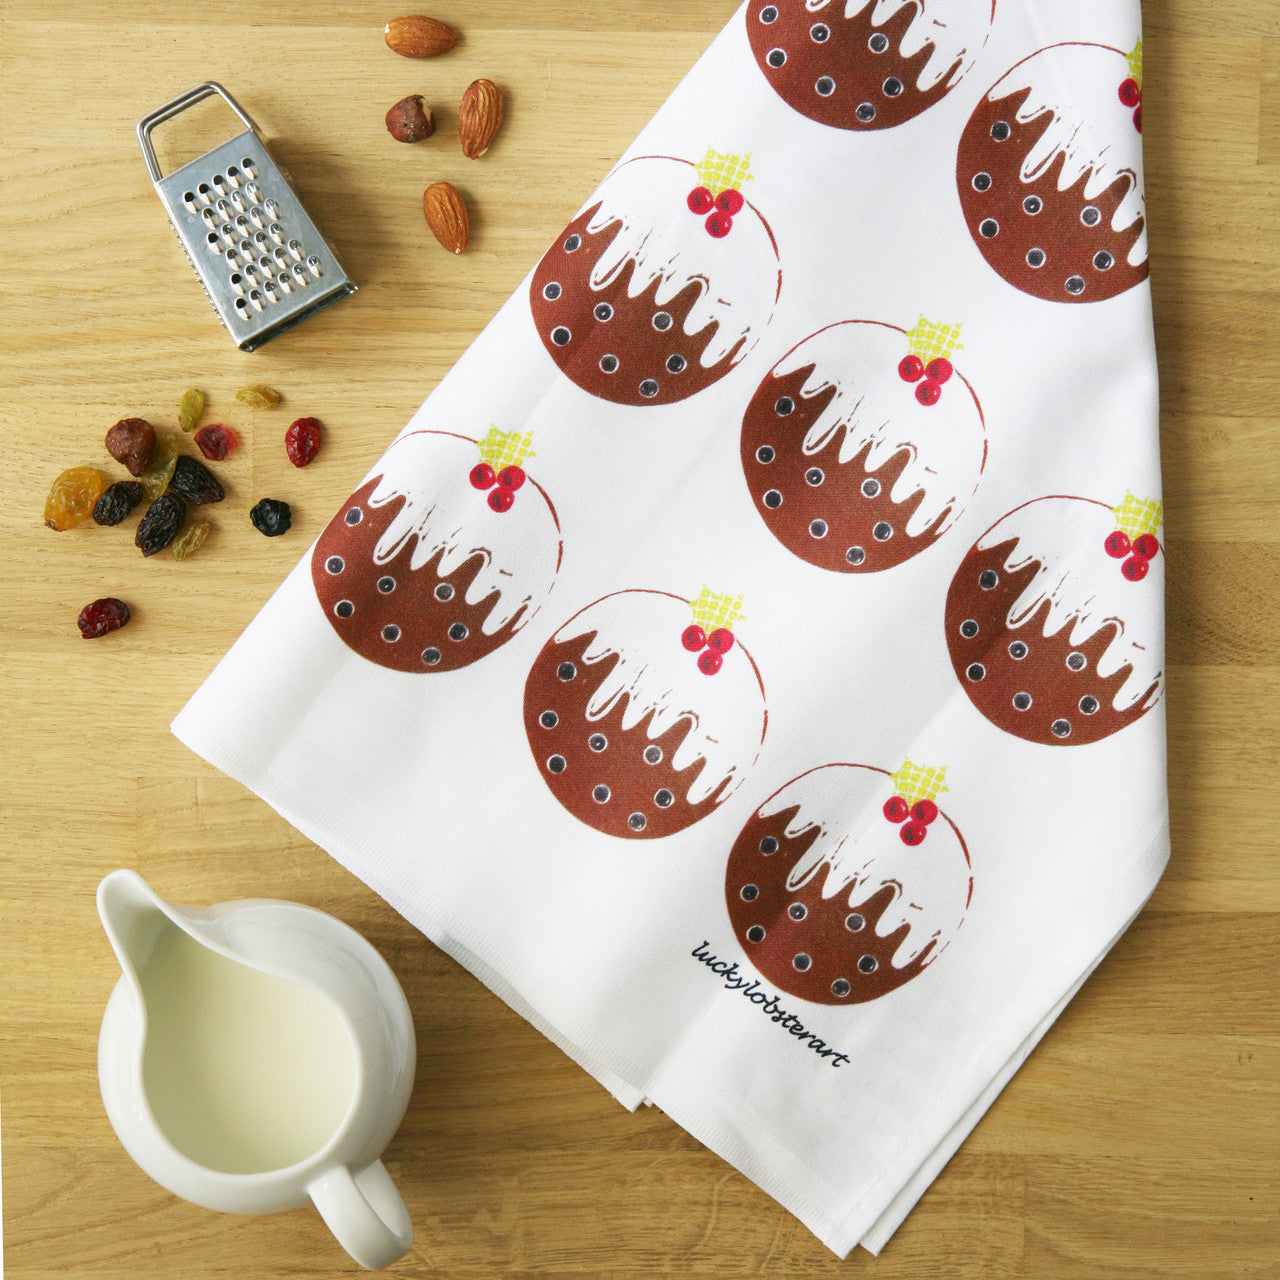 100% cotton Christmas pudding tea towel from British designer Lucky Lobster Art.